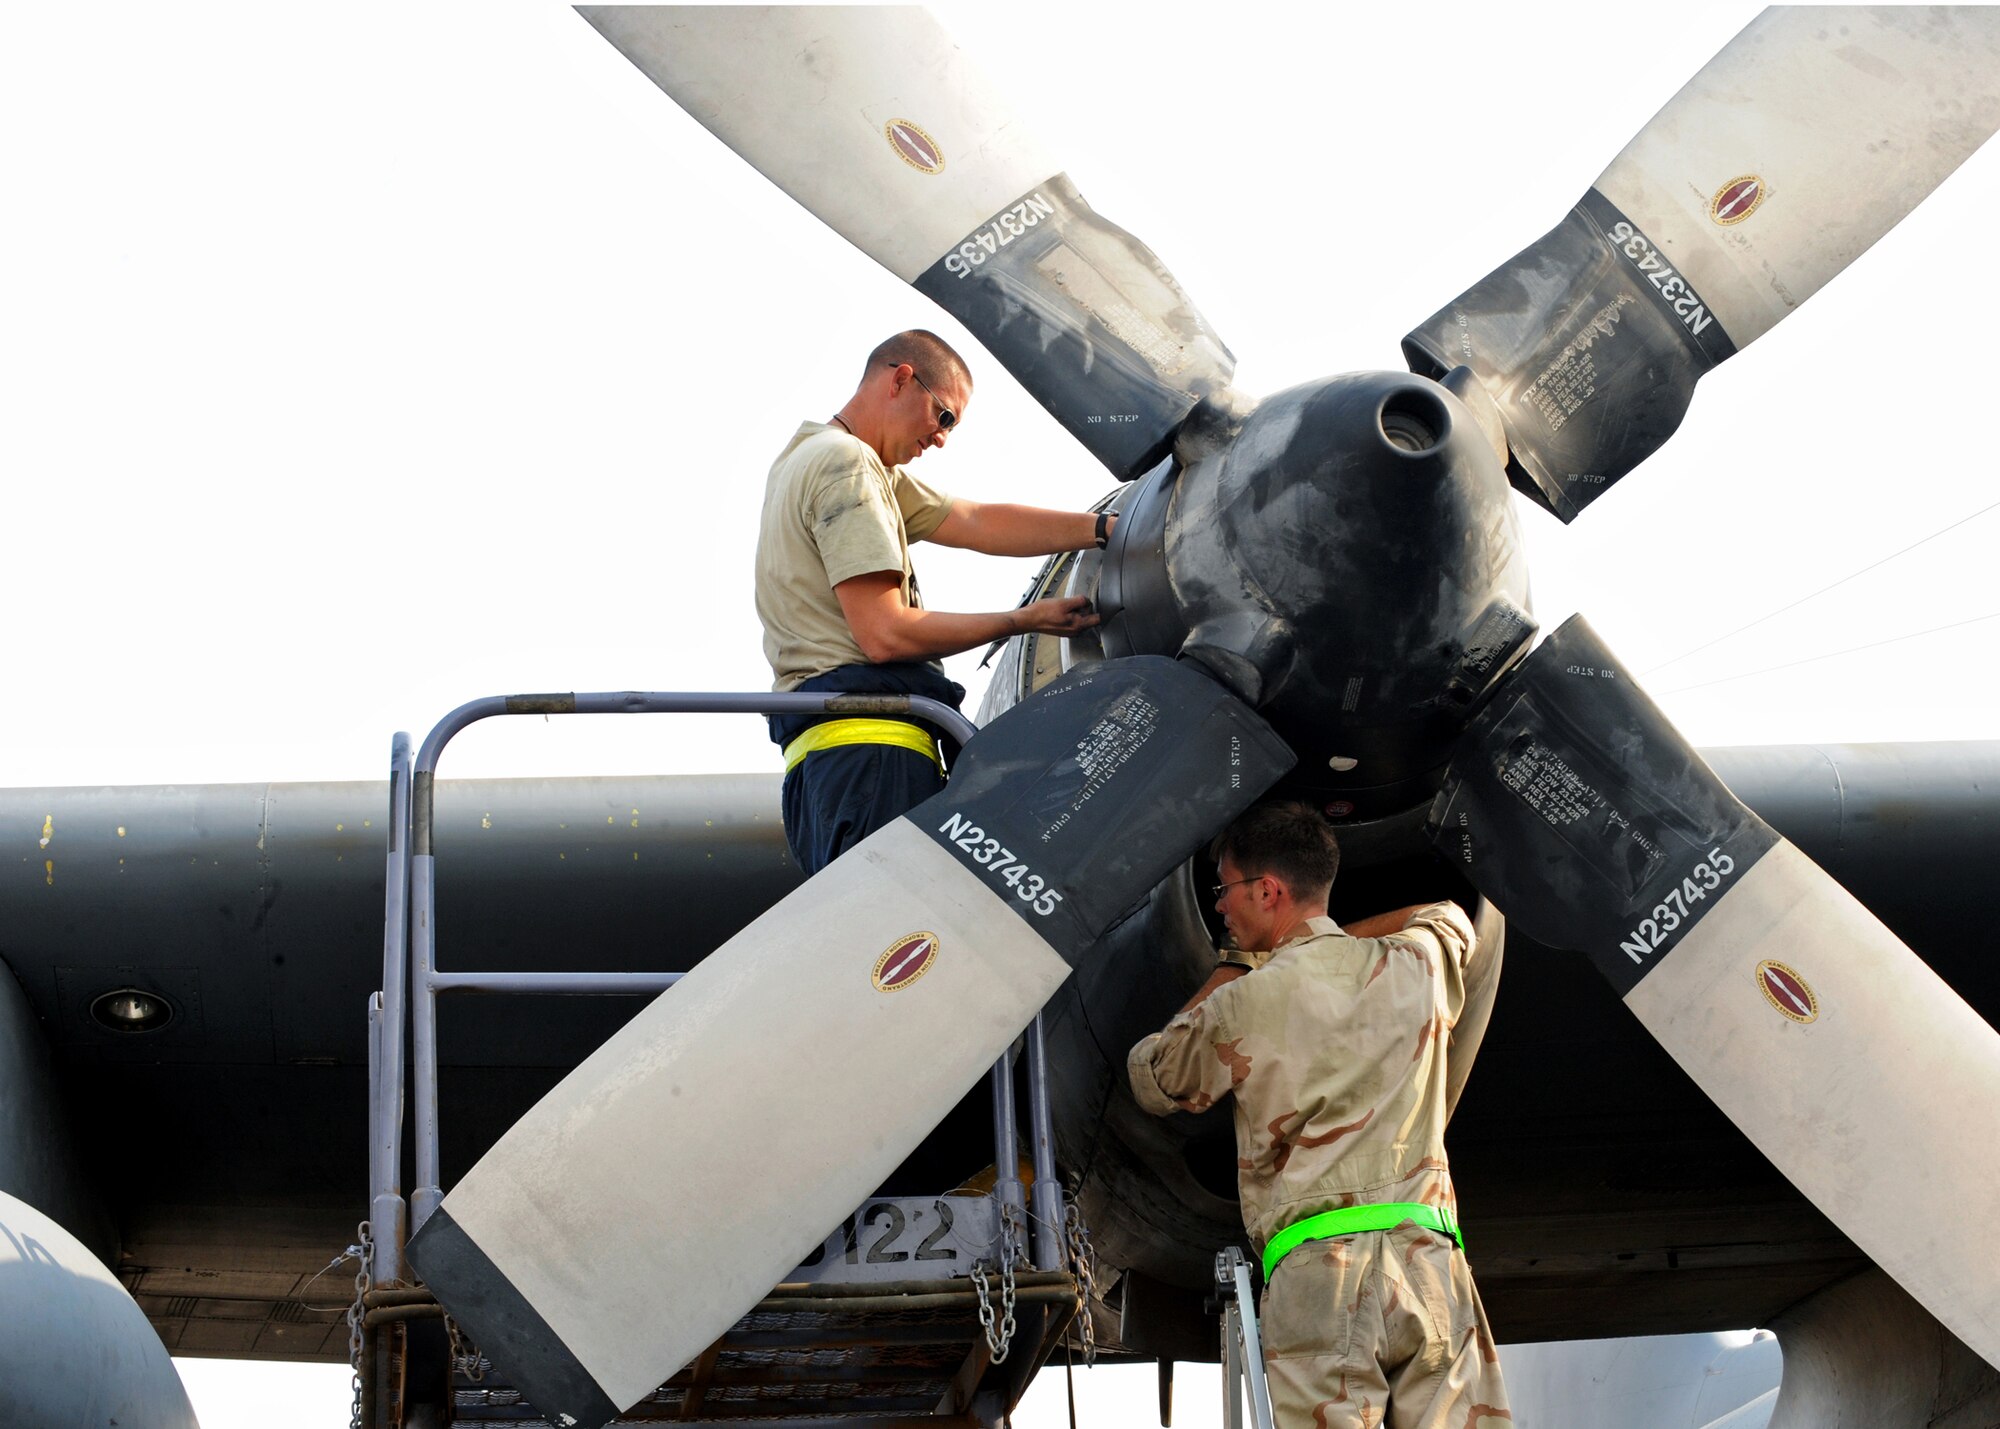 SOUTHWEST ASIA -- Tech. Sgt. Christopher Chadwell (left), checks the hydraulic fluid level on a C-130E propeller while Staff Sgt. William Aker inspects the engine inlet Aug. 11, 2010, at an undisclosed air base here. Sergeant Chadwell is an aerospace propulsion craftsman and Sergeant Aker is a flying crew chief. Both are assigned to the 386th Expeditionary Aircraft Maintenance Squadron, one of the busiest C-130 combat airlift and EC-130 electronic attack maintenance units in U.S. Air Forces Central Command. (U.S. Air Force photo by Senior Airman Laura Turner)
